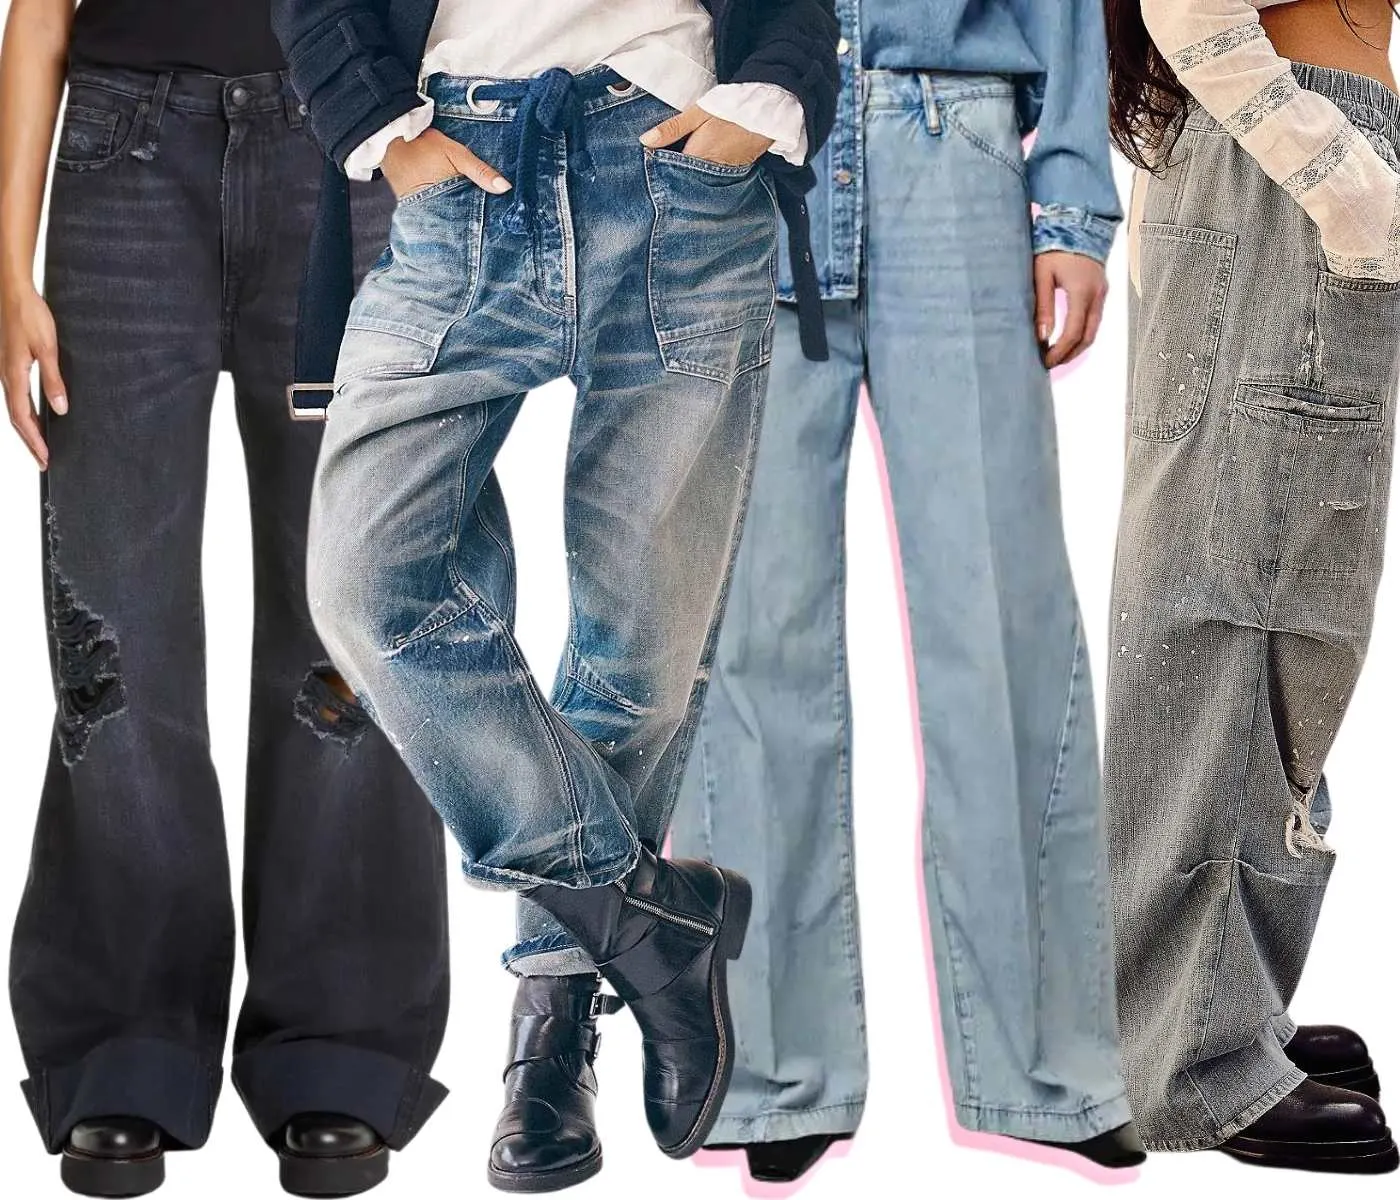 Collage of cropped view of 4 women's legs wearing different ankle boots with jeans that are baggy and loose.